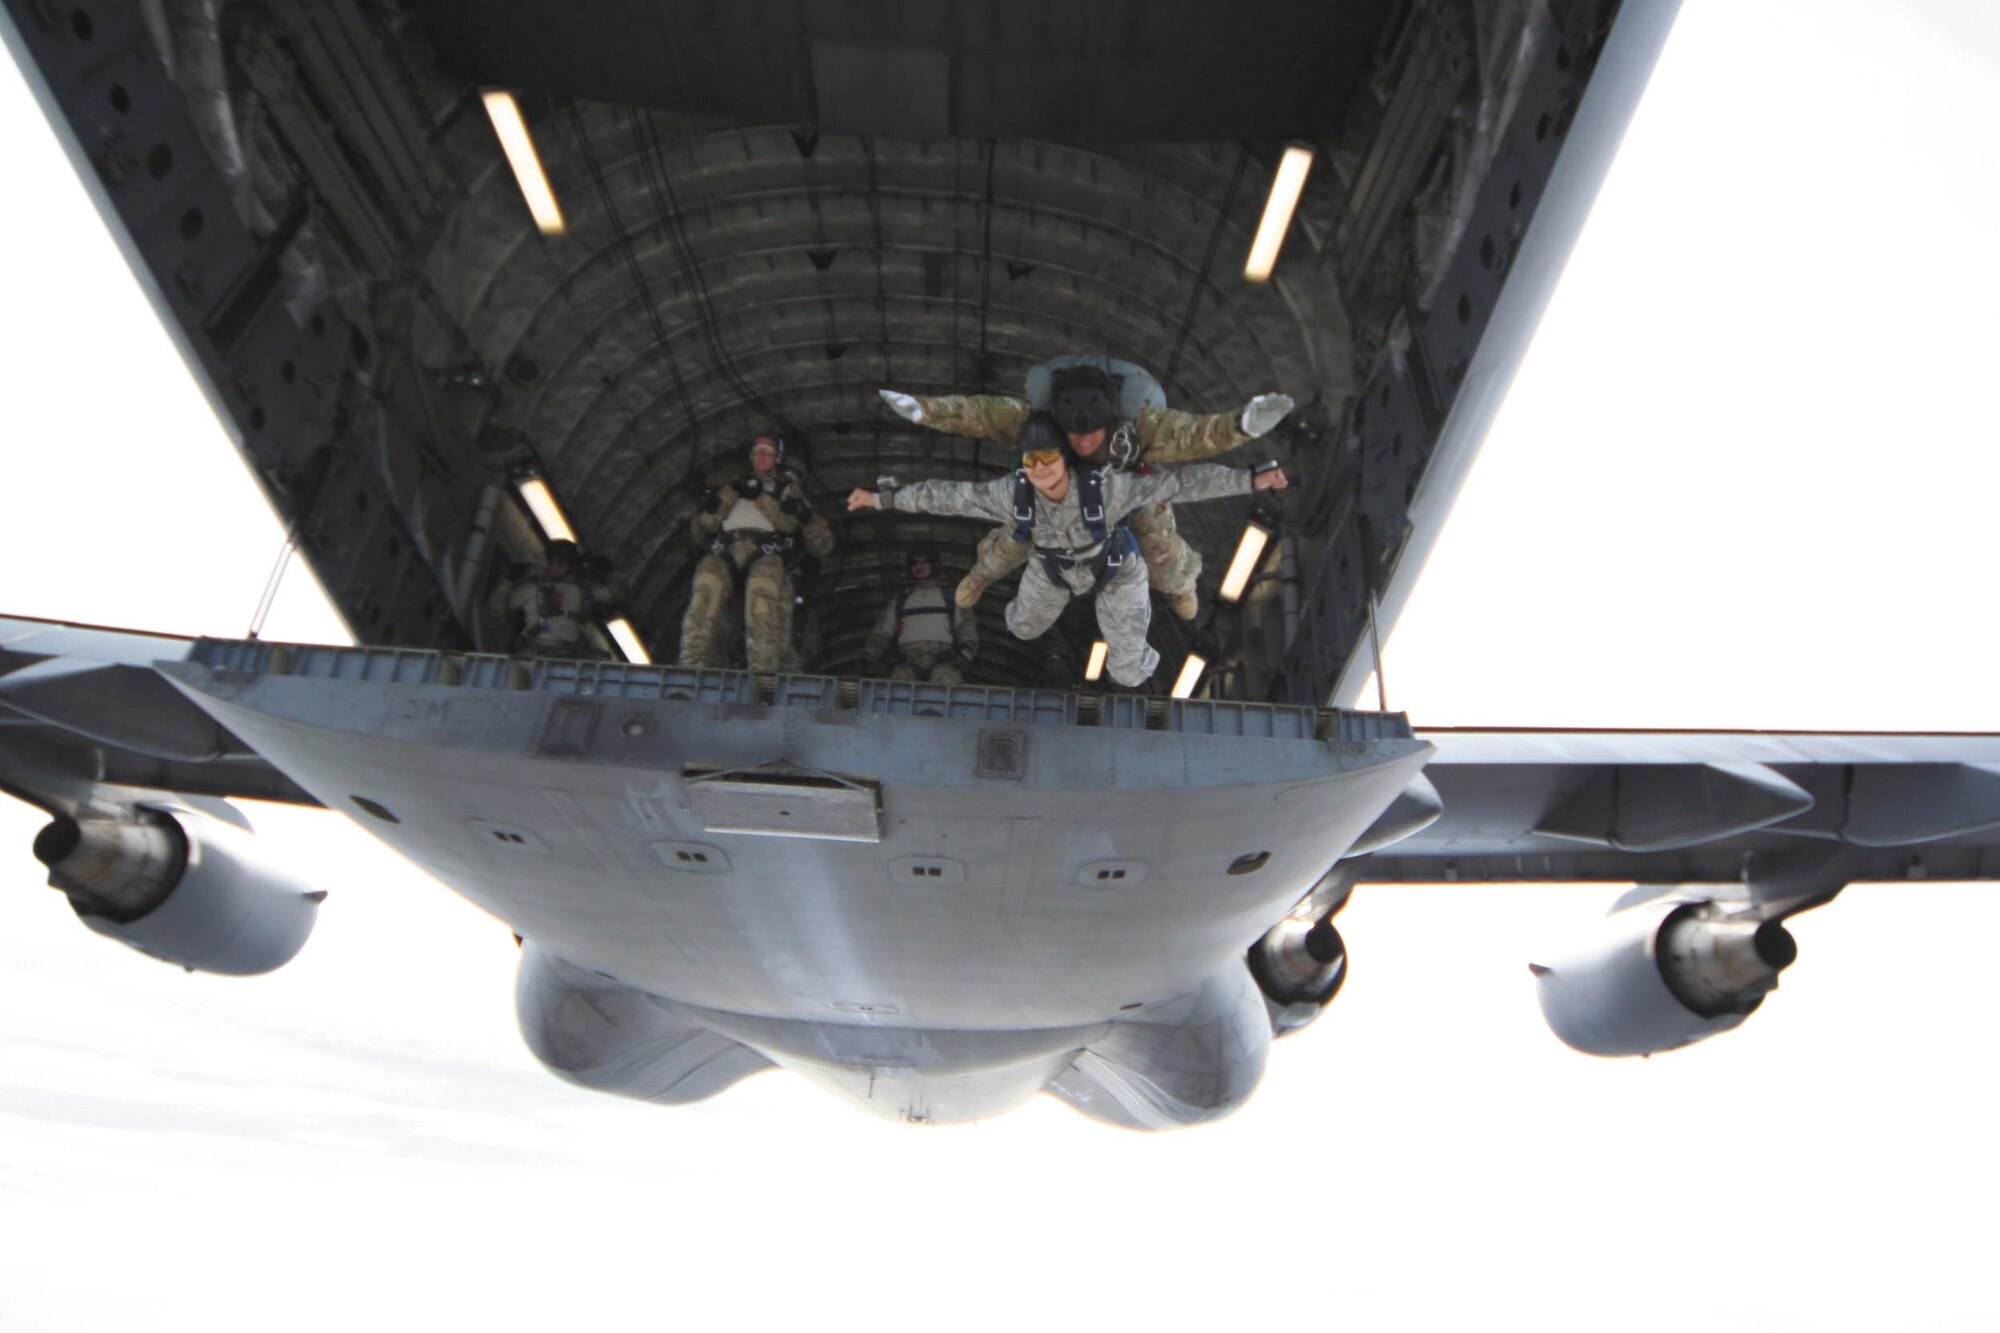 Staff Sgt. Victoria Lopez jumps in tandem with Kirby Rodriguez from a C-17 at 10,000 feet. Lopez is an executive assistant with the 37th Training Group and Rodriguez is a tandem master jumper and personnel parachute program manager with the 342nd Training Squadron. Still in the aircraft and waiting to jump is Senior Master Sgt. Jason Lydon with his tandem passenger Senior Airman Chris Lewis.  (U.S. Air Force photo by Tech. Sgt. Marc Esposito)